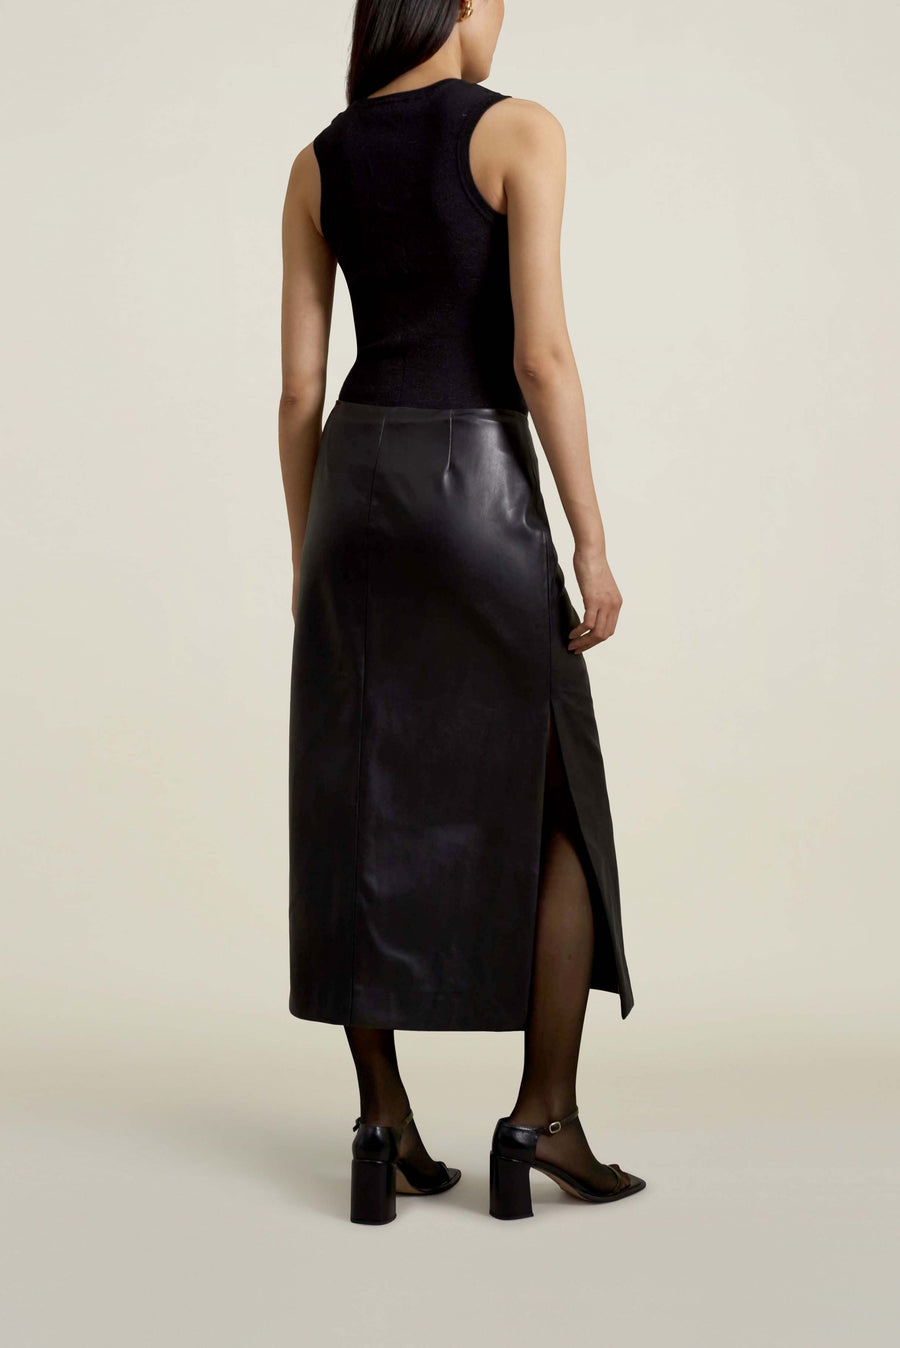 Forsyth Pencil Skirt in Black Faux Leather